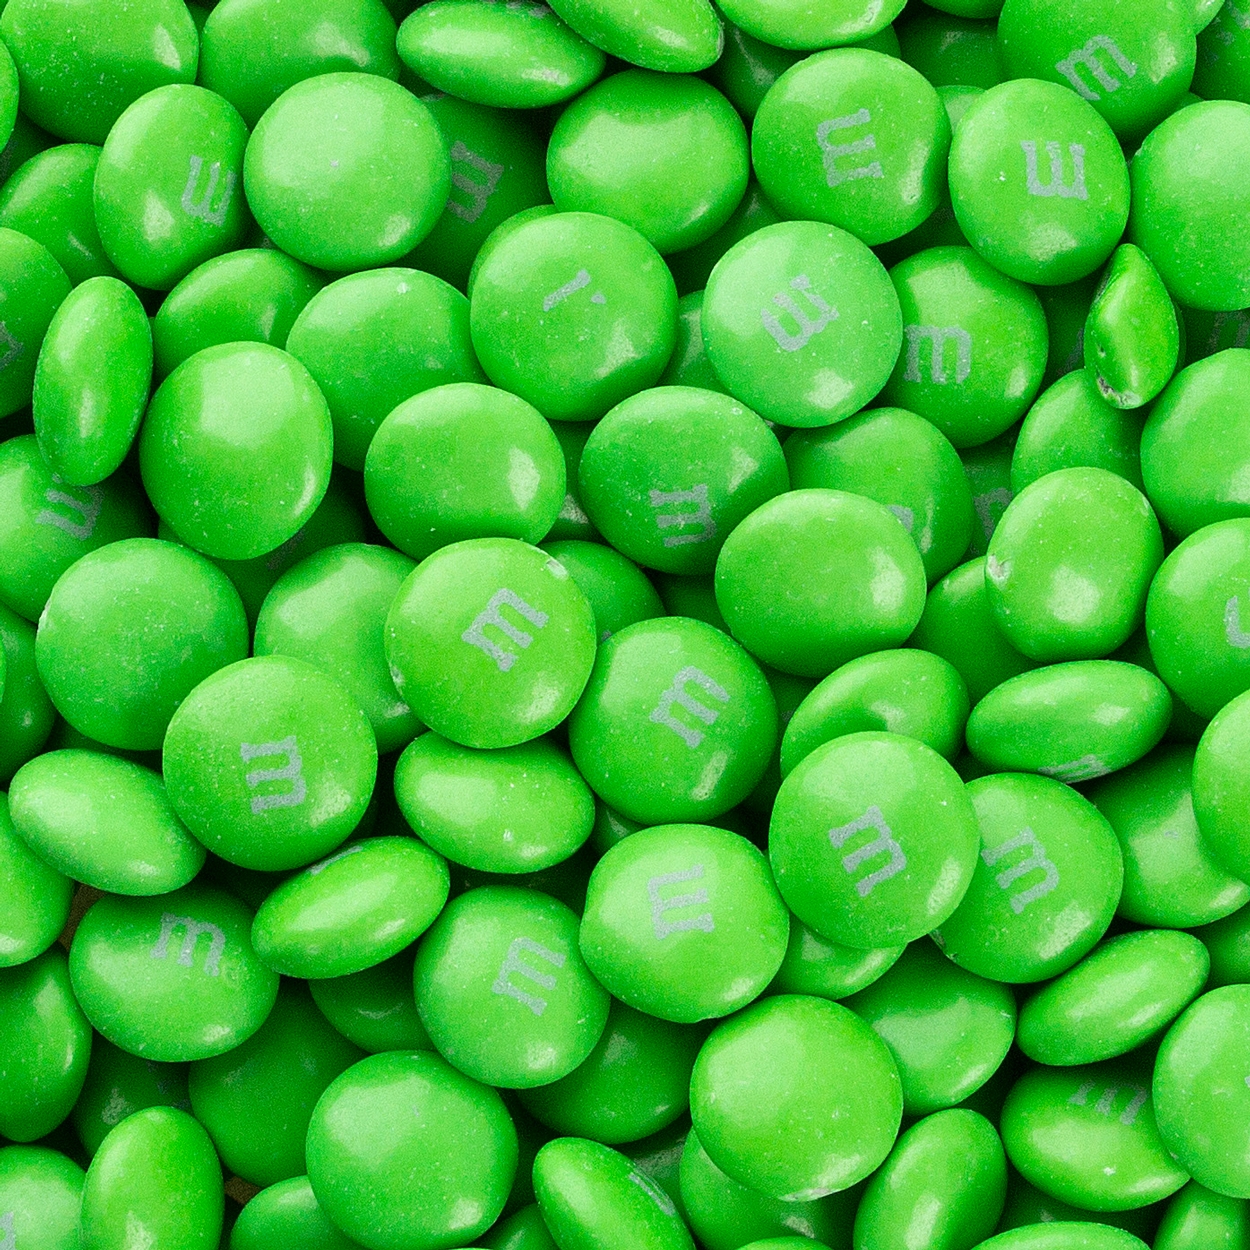 green m&ms packet